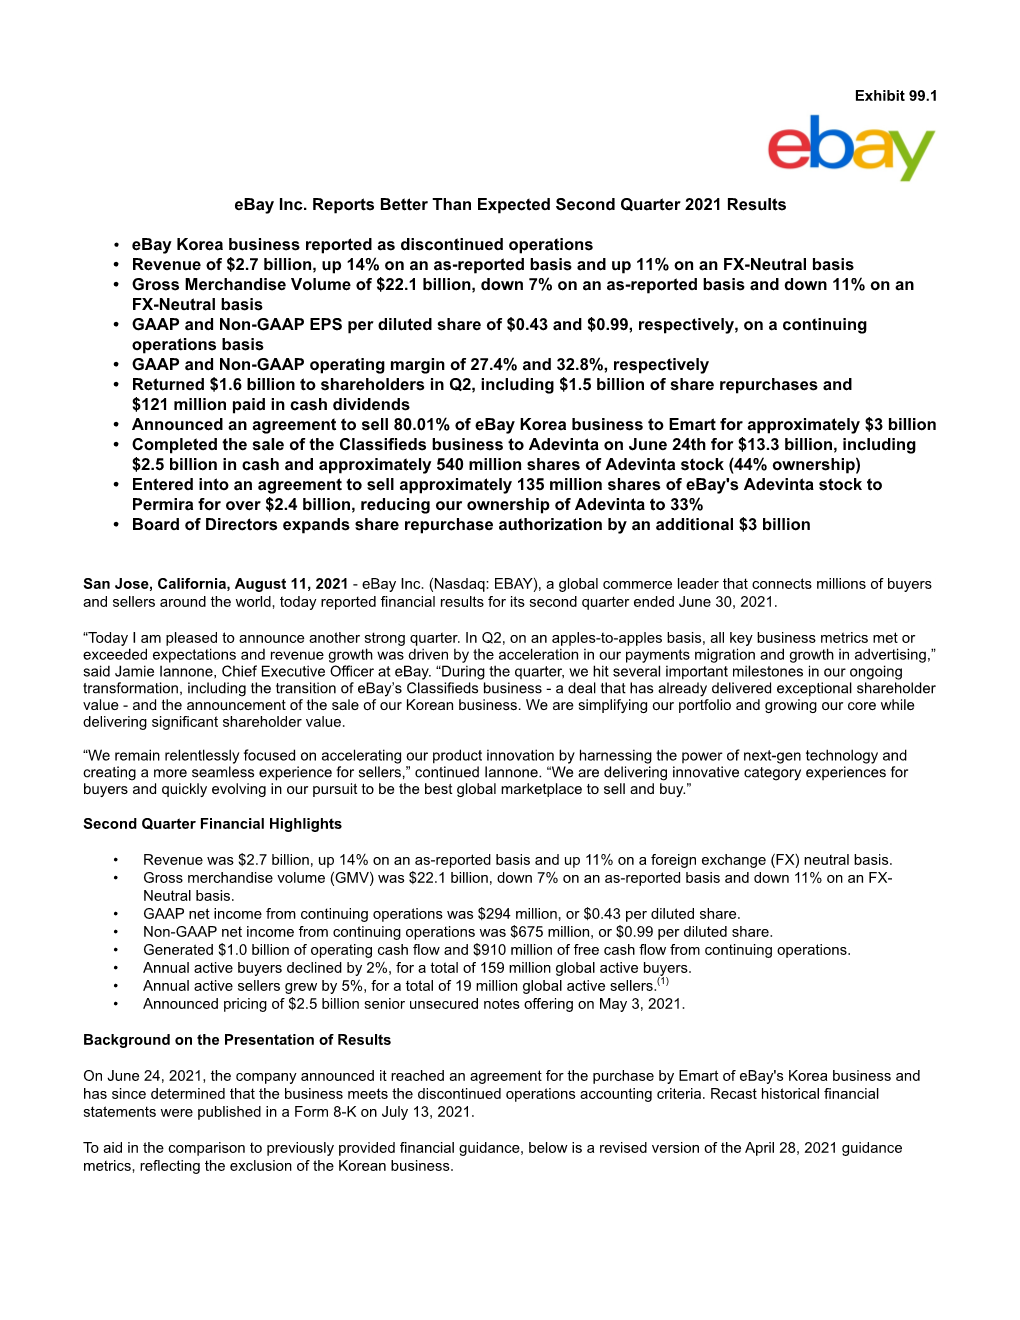 Ebay Inc. Reports Better Than Expected Second Quarter 2021 Results